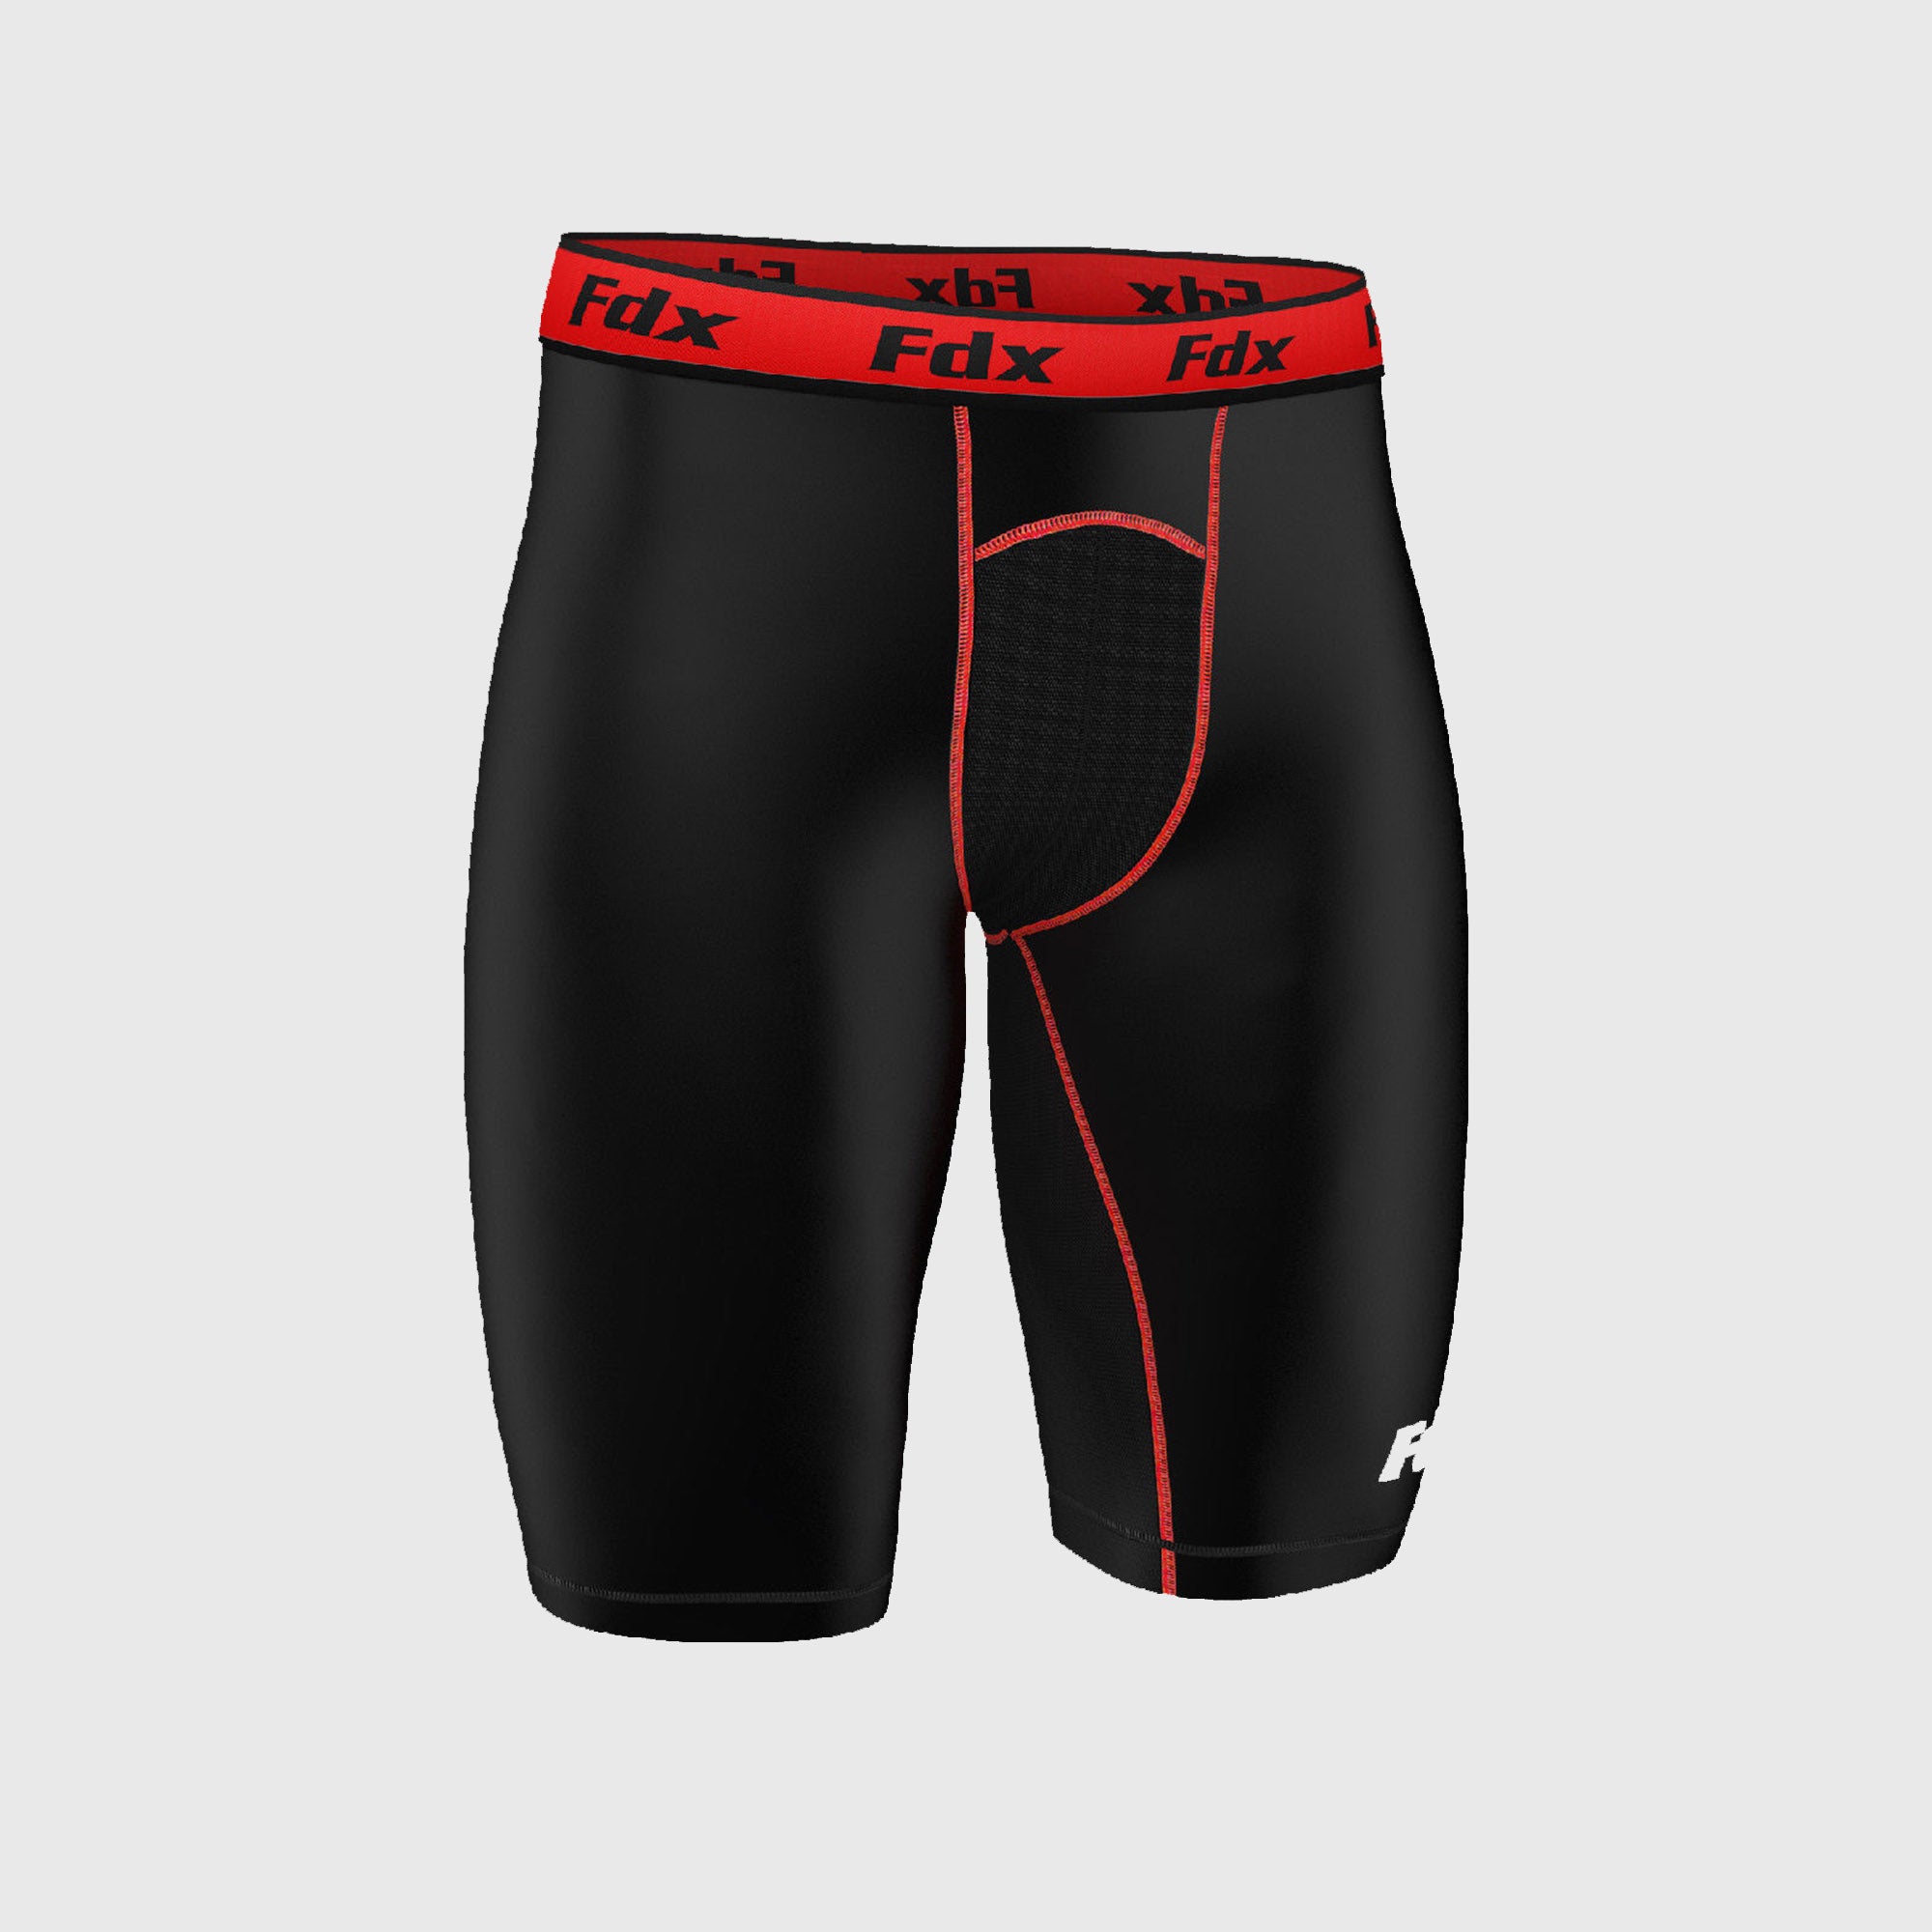 Fdx Men's Black & Red Compression Shorts Gym Workout Running Athletic Yoga Elastic Waistband Stretchable Breathable